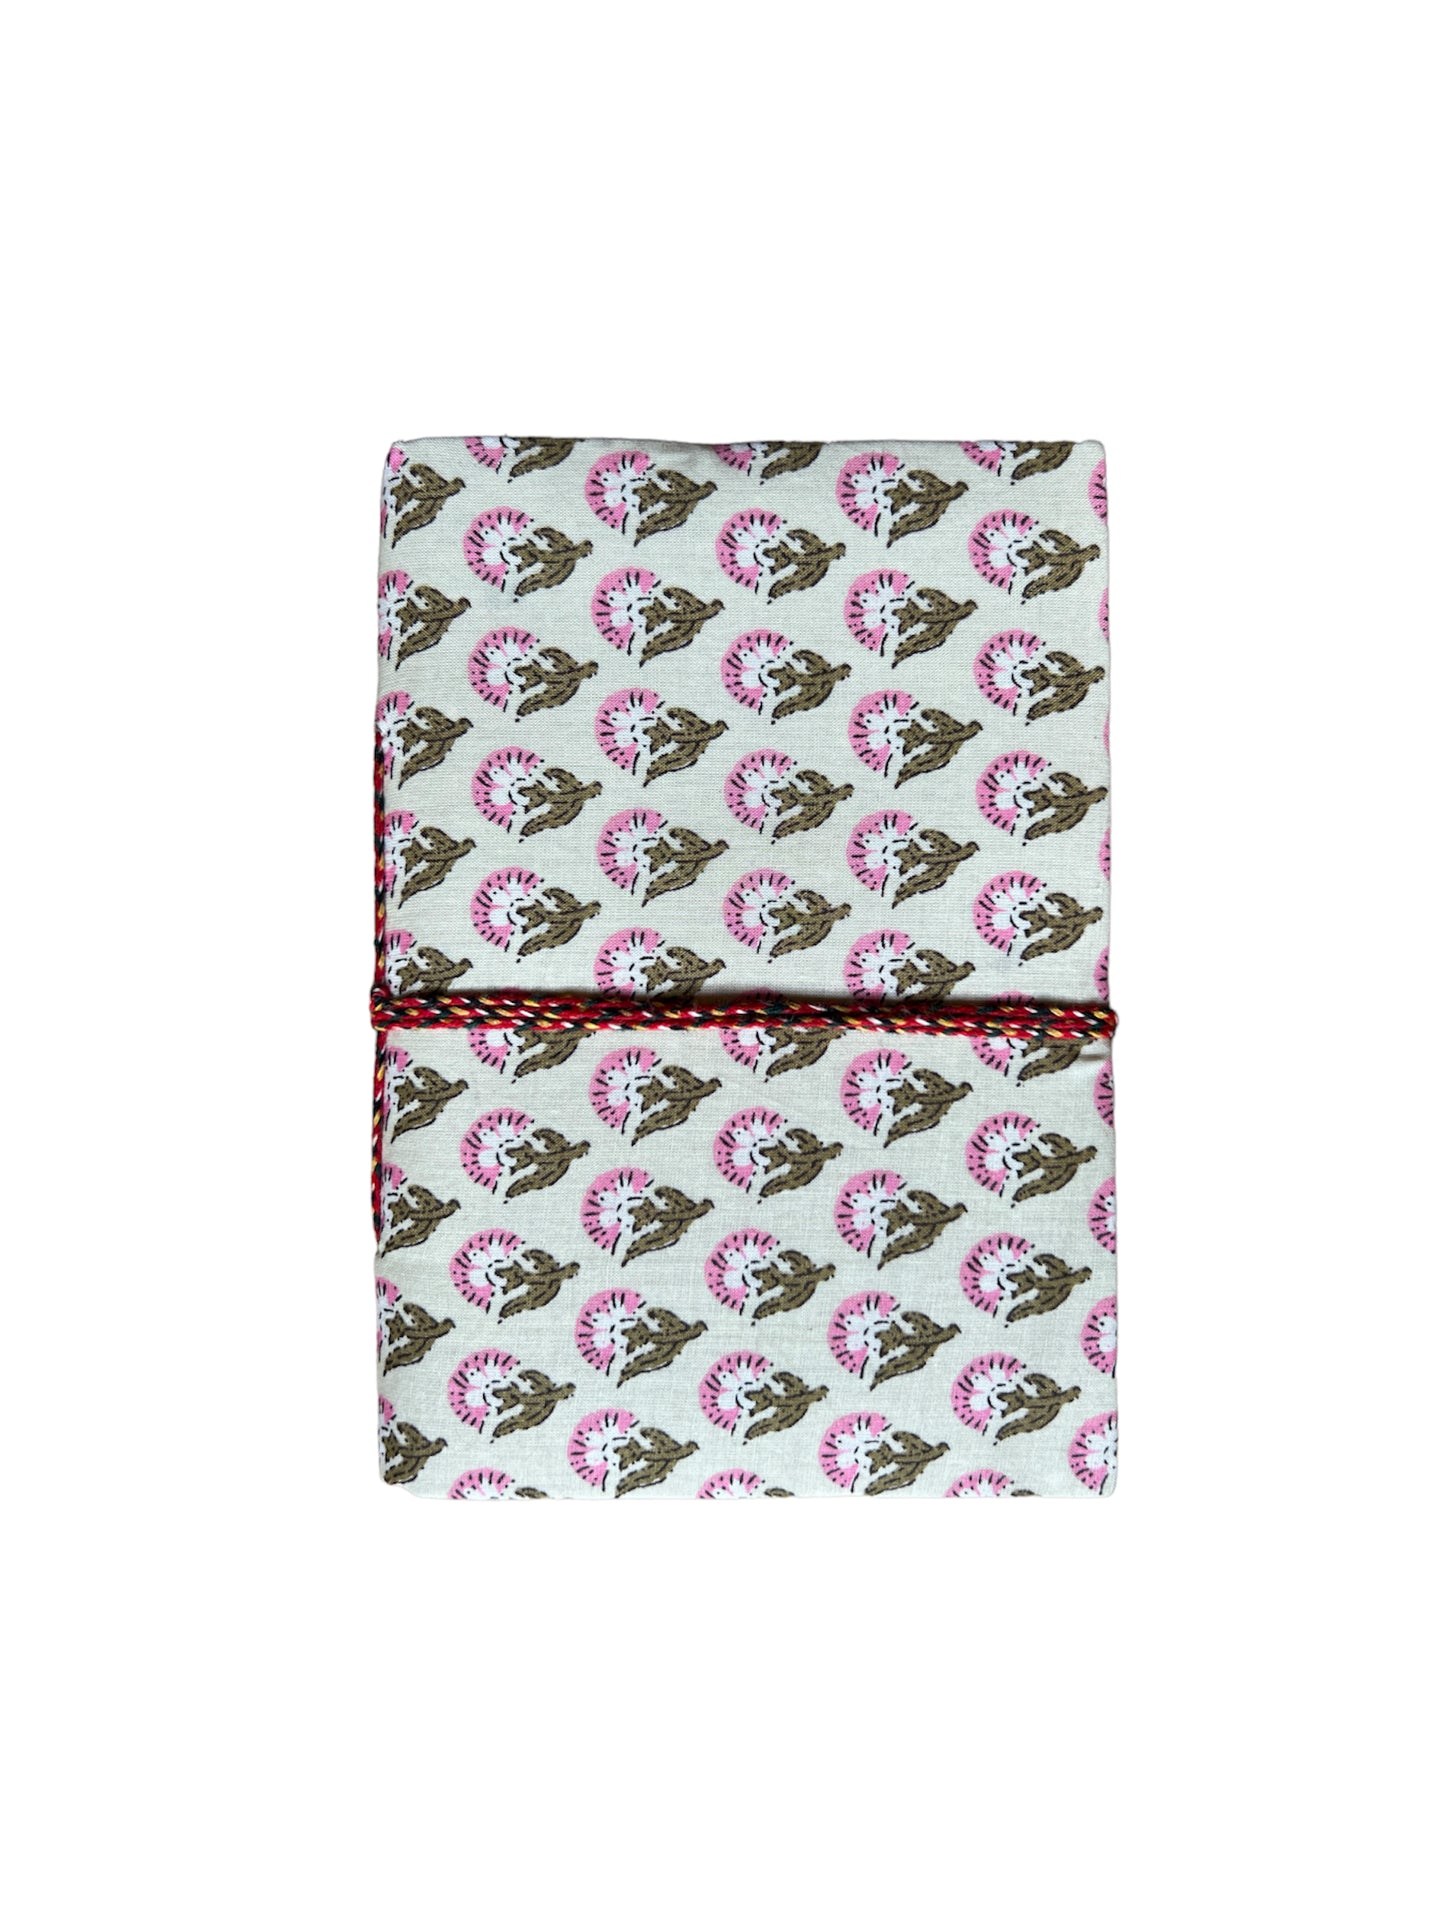 LINED NOTEBOOK IN WHITE PINK GREEN